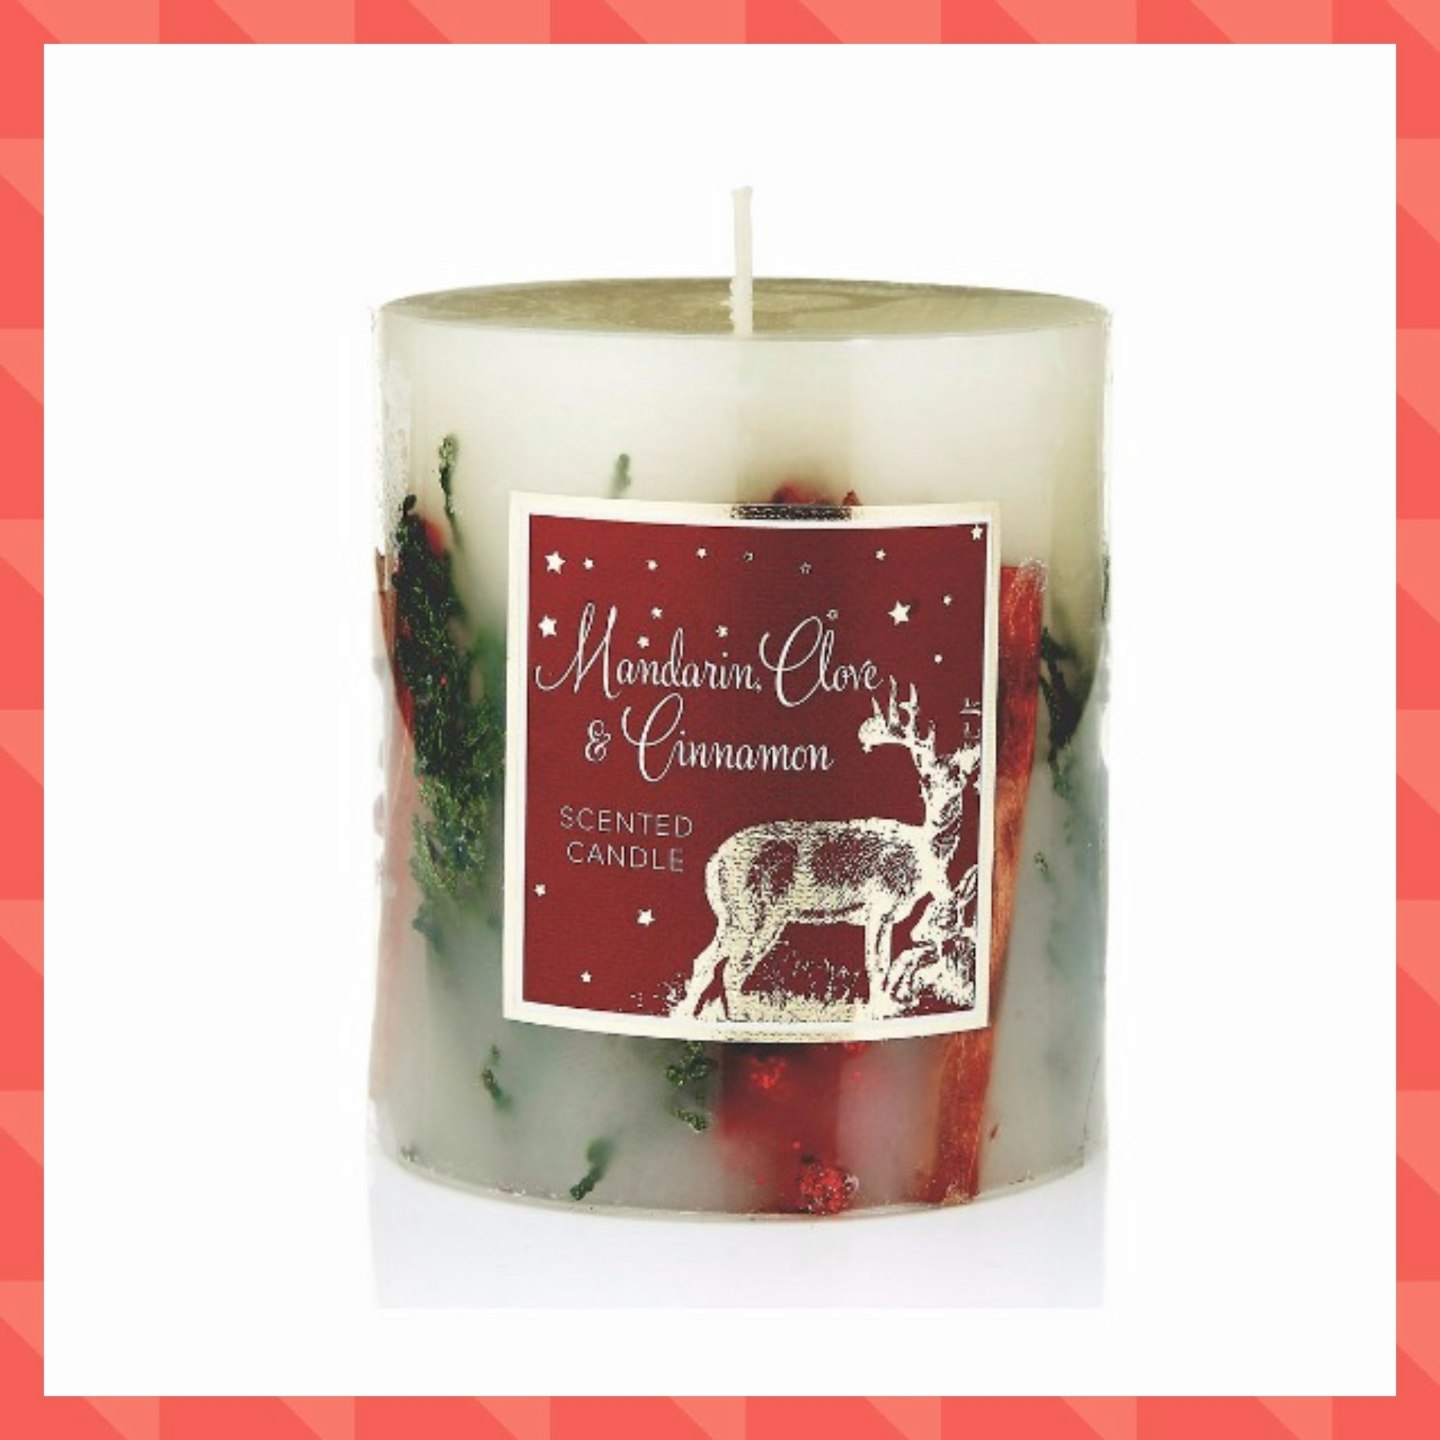 marks-spencer-christmas-candle